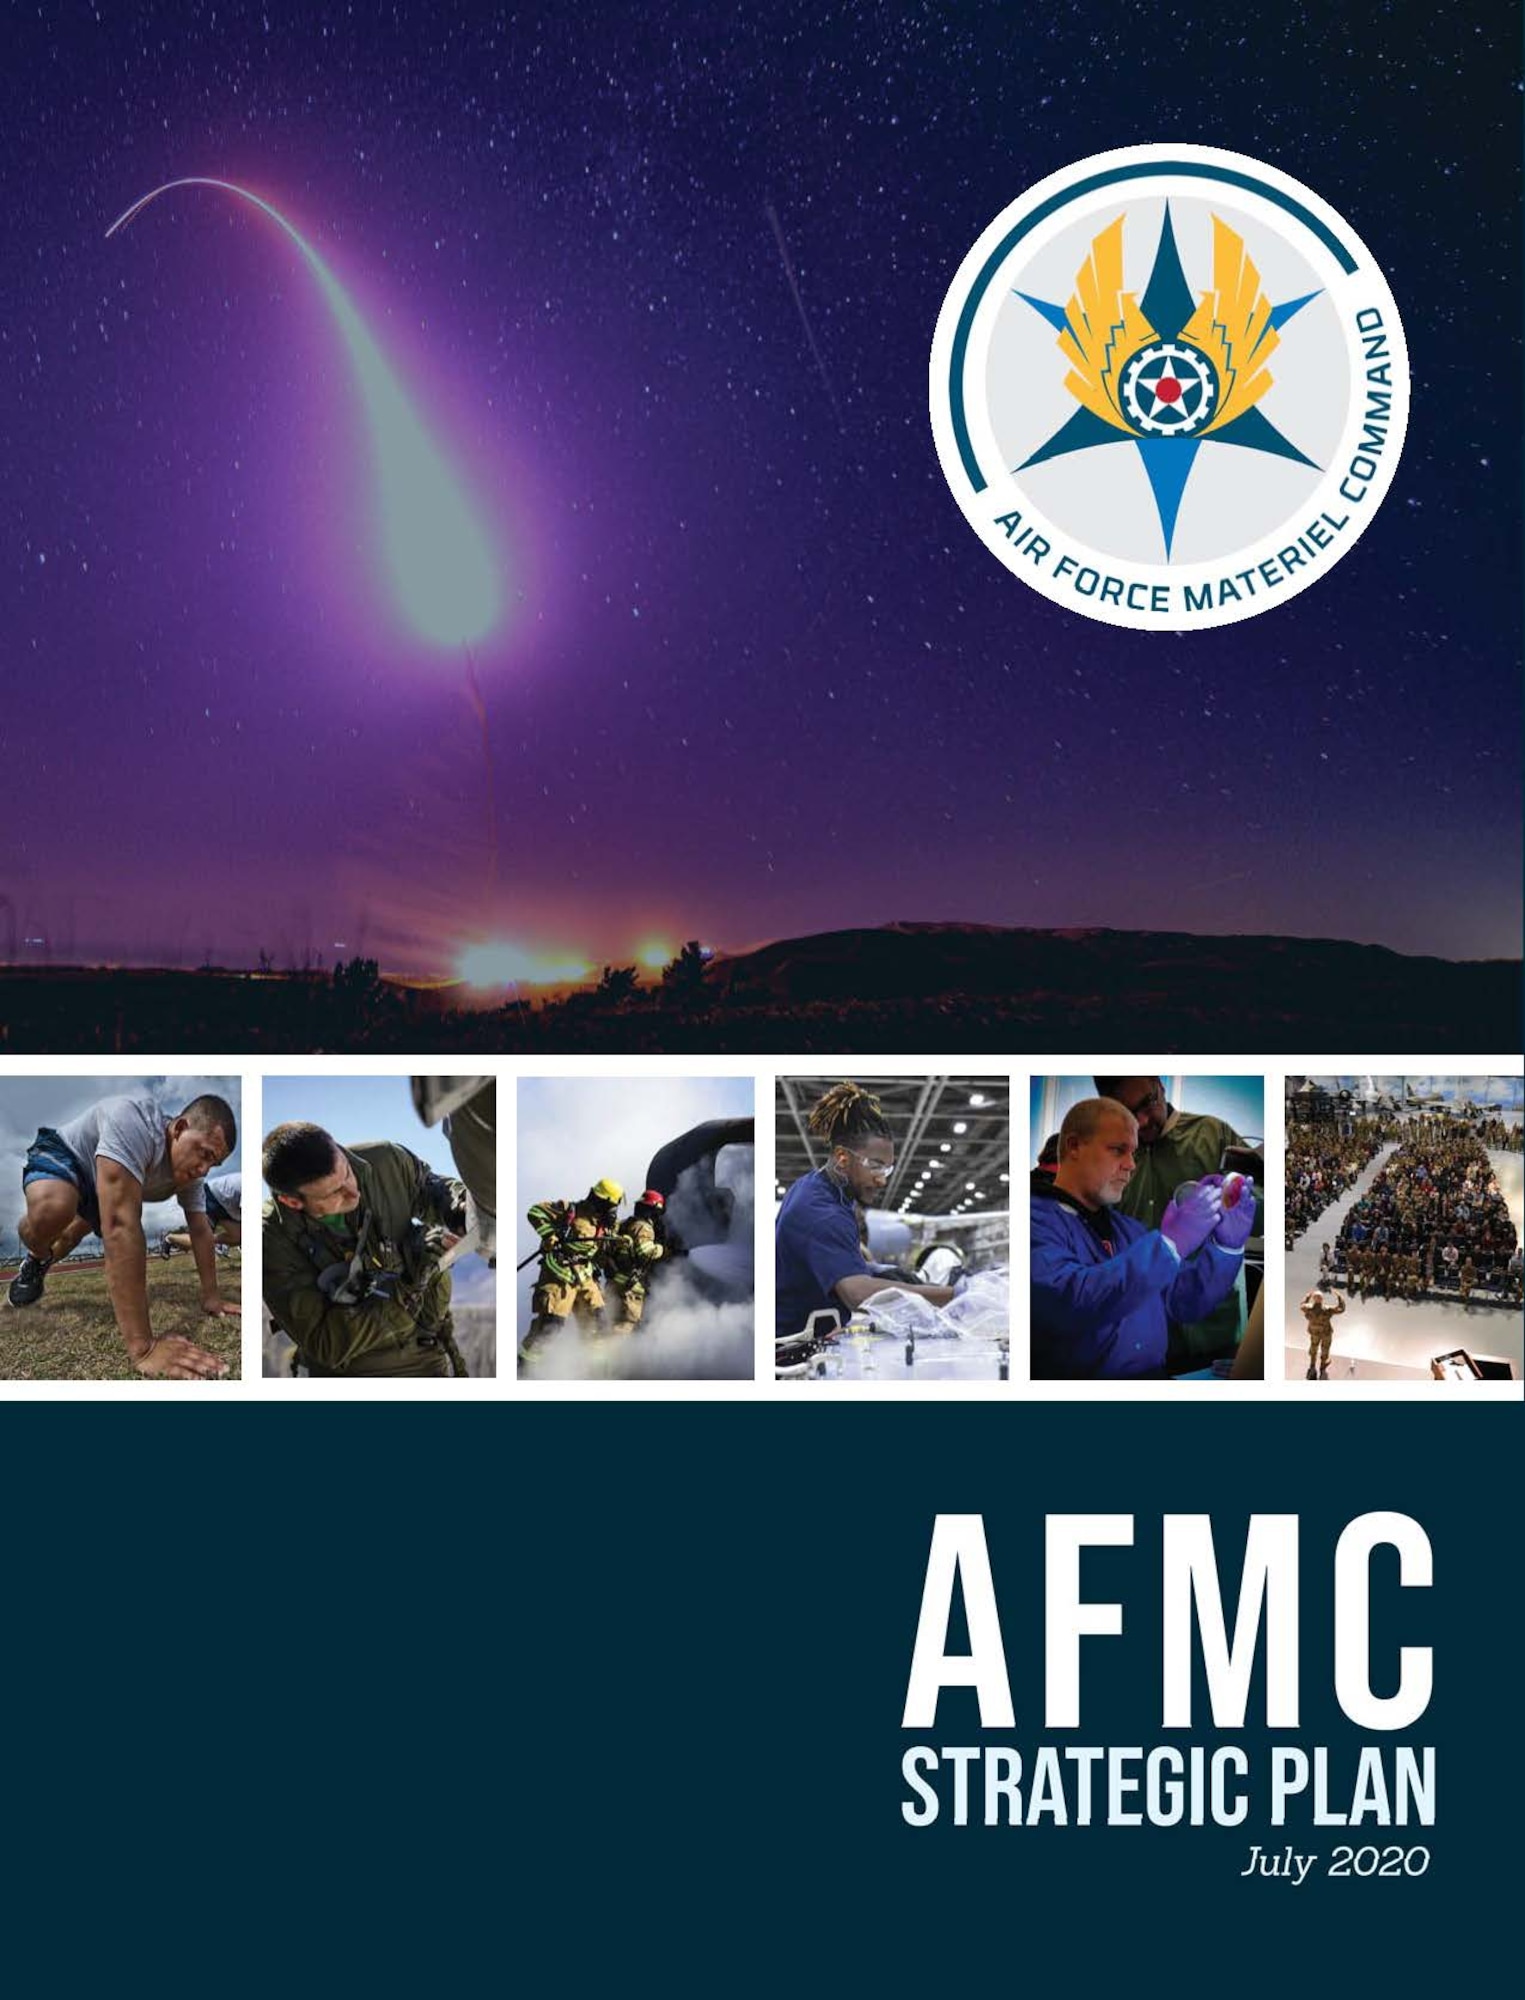 The Air Force Materiel Command has released an updated strategic plan identifying four key focus areas as the organization continues to ensure the Air and Space Forces remain ready to fly, fight and win today and into the future.